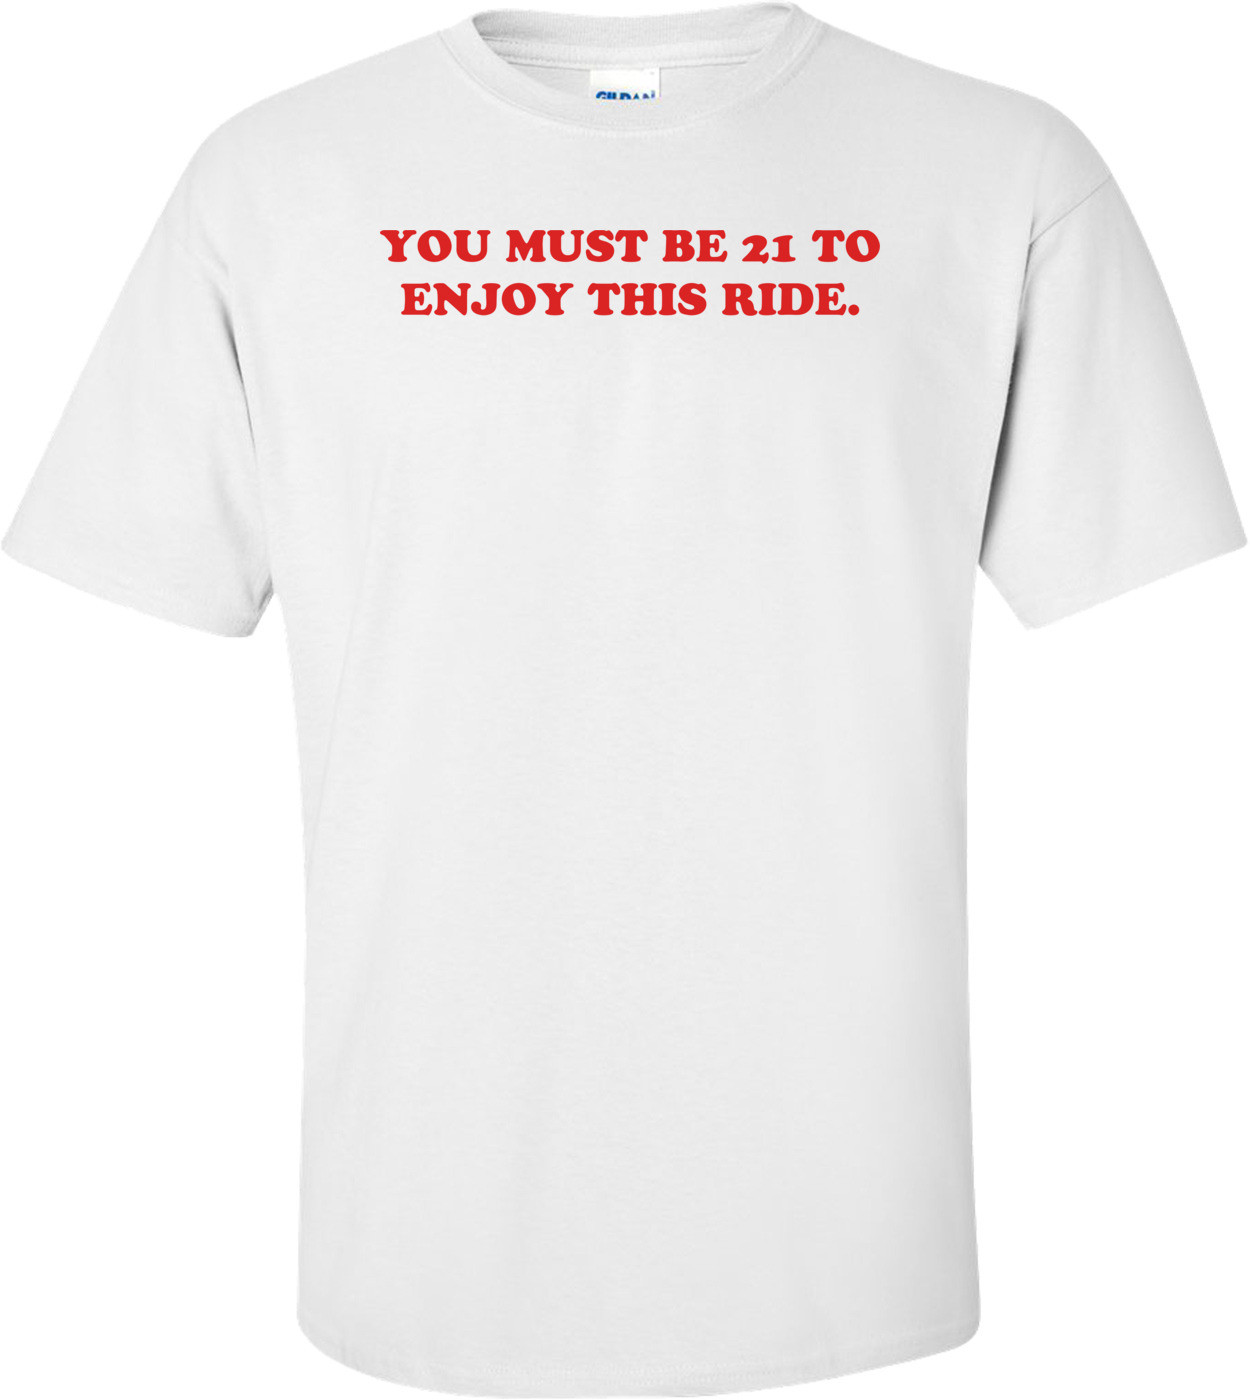 You Must Be 21 To Enjoy This Ride. Shirt